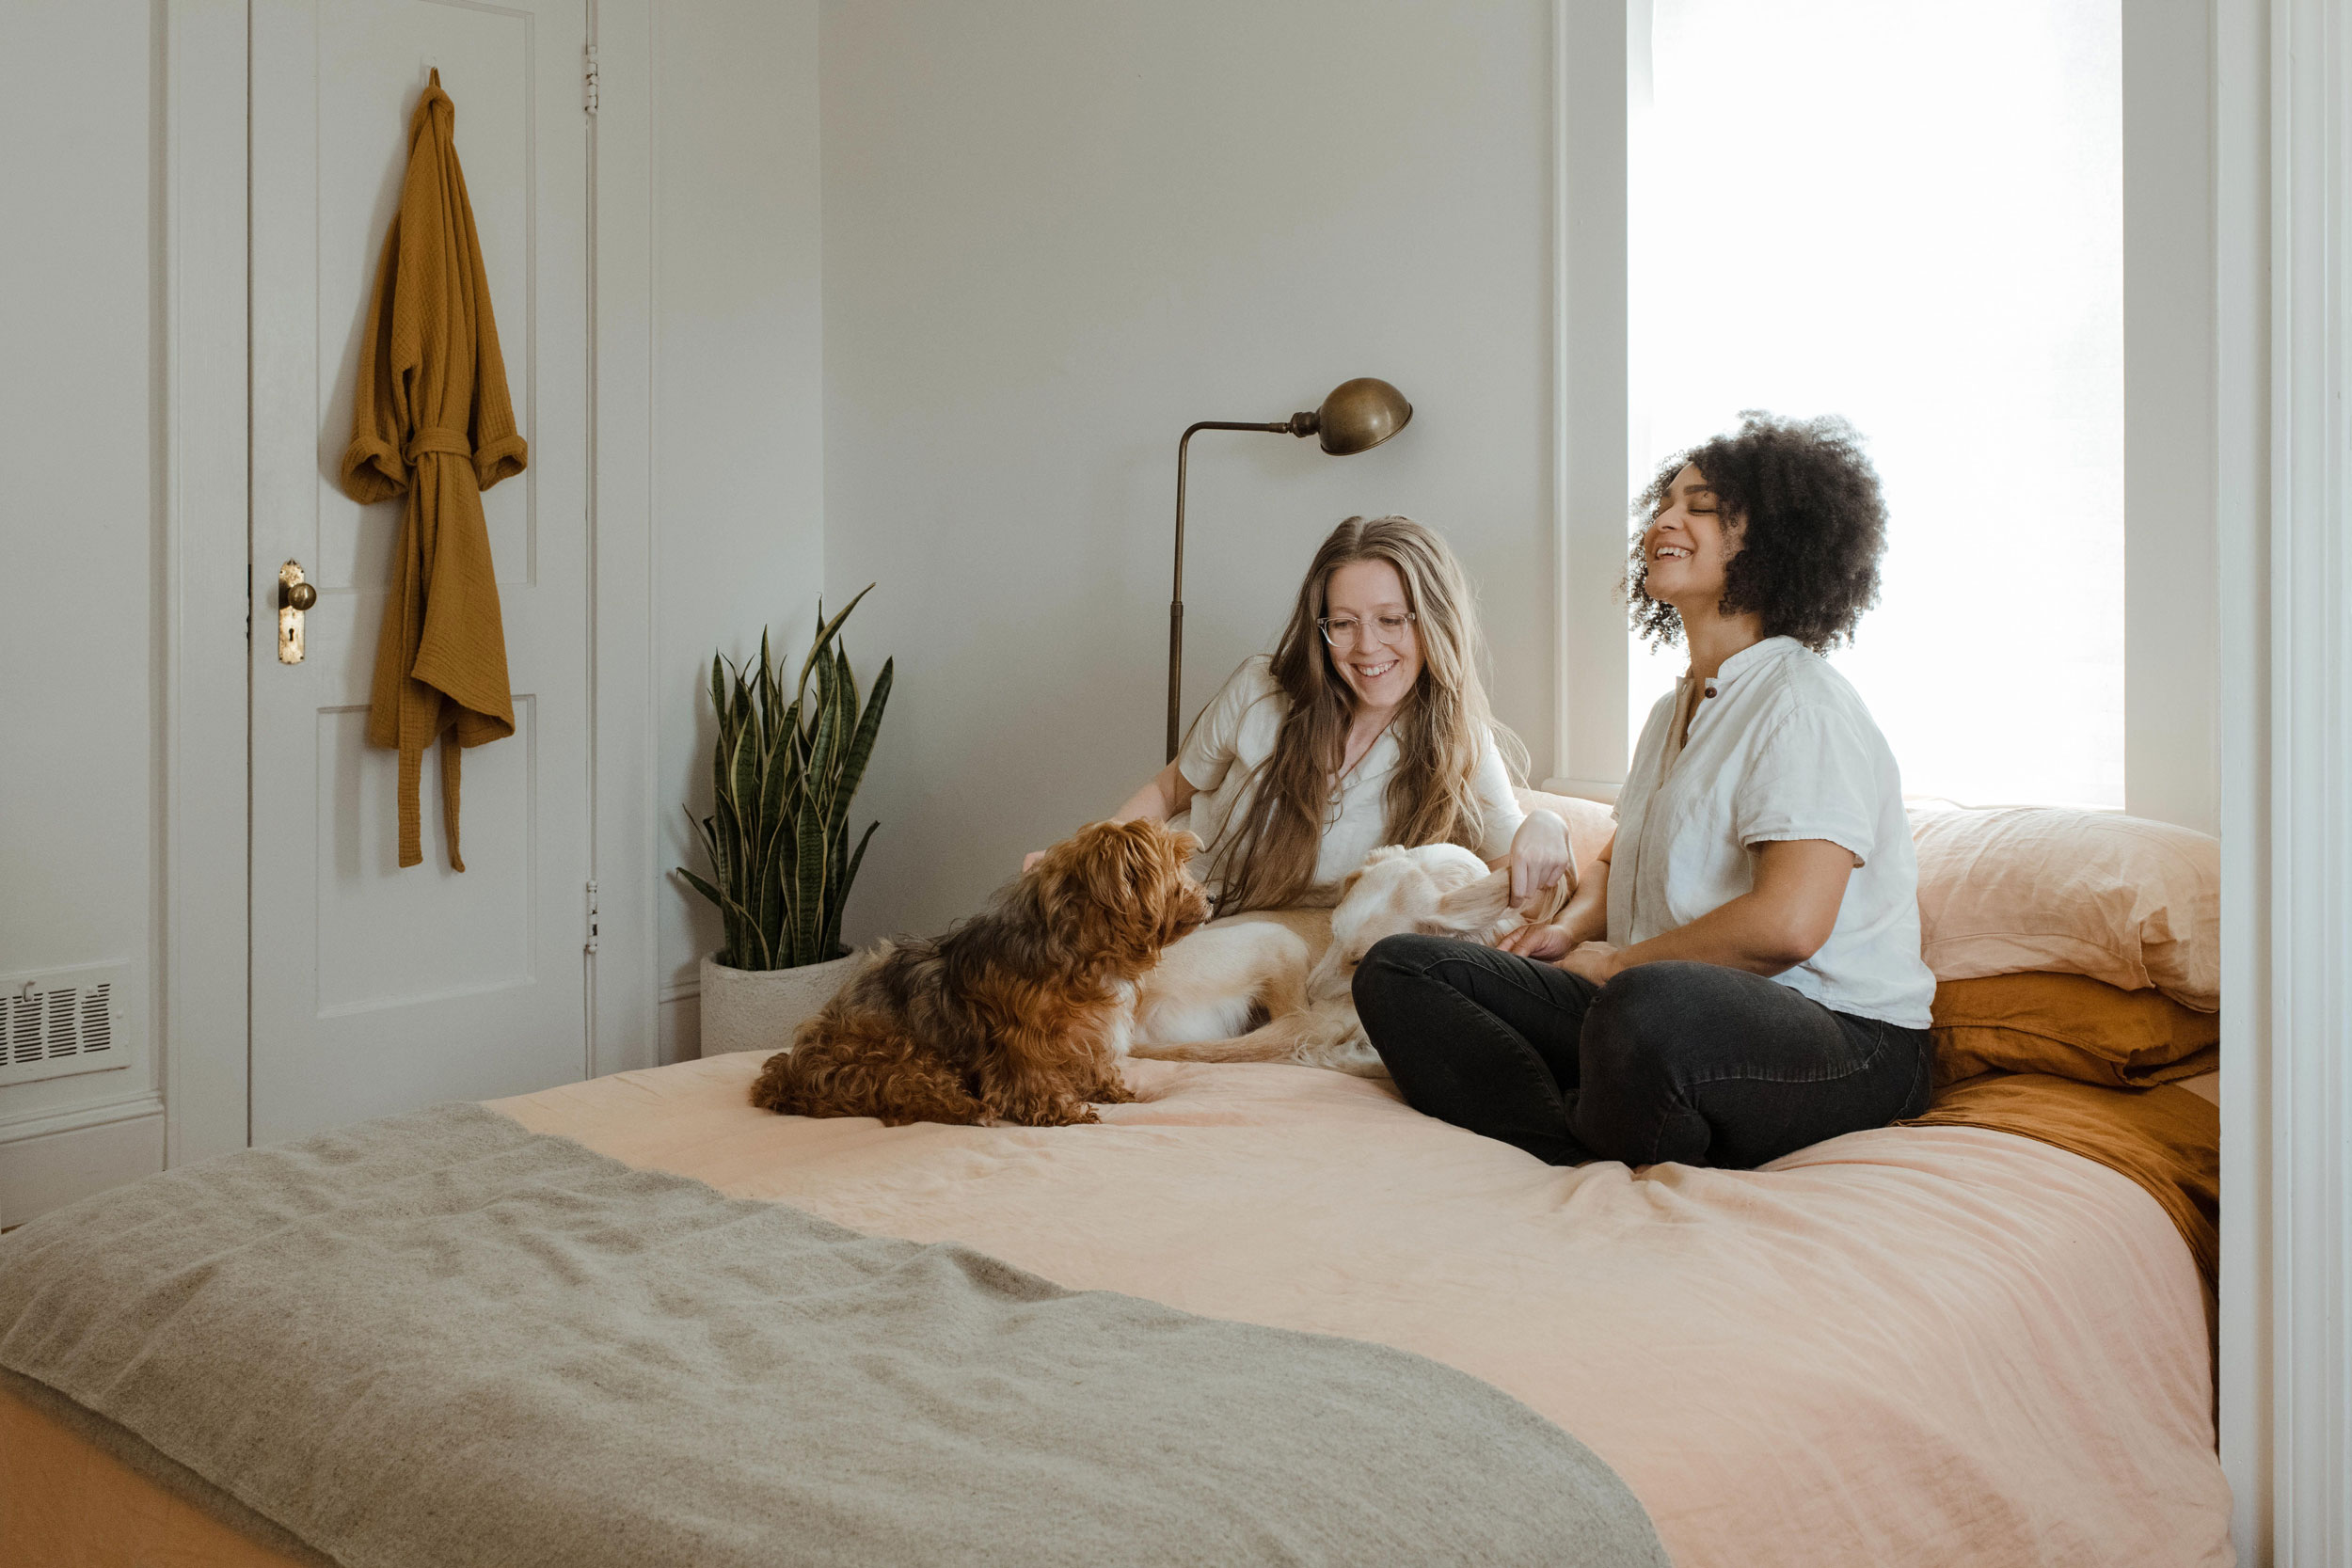 women sitting on the bed laughing with their dogs.